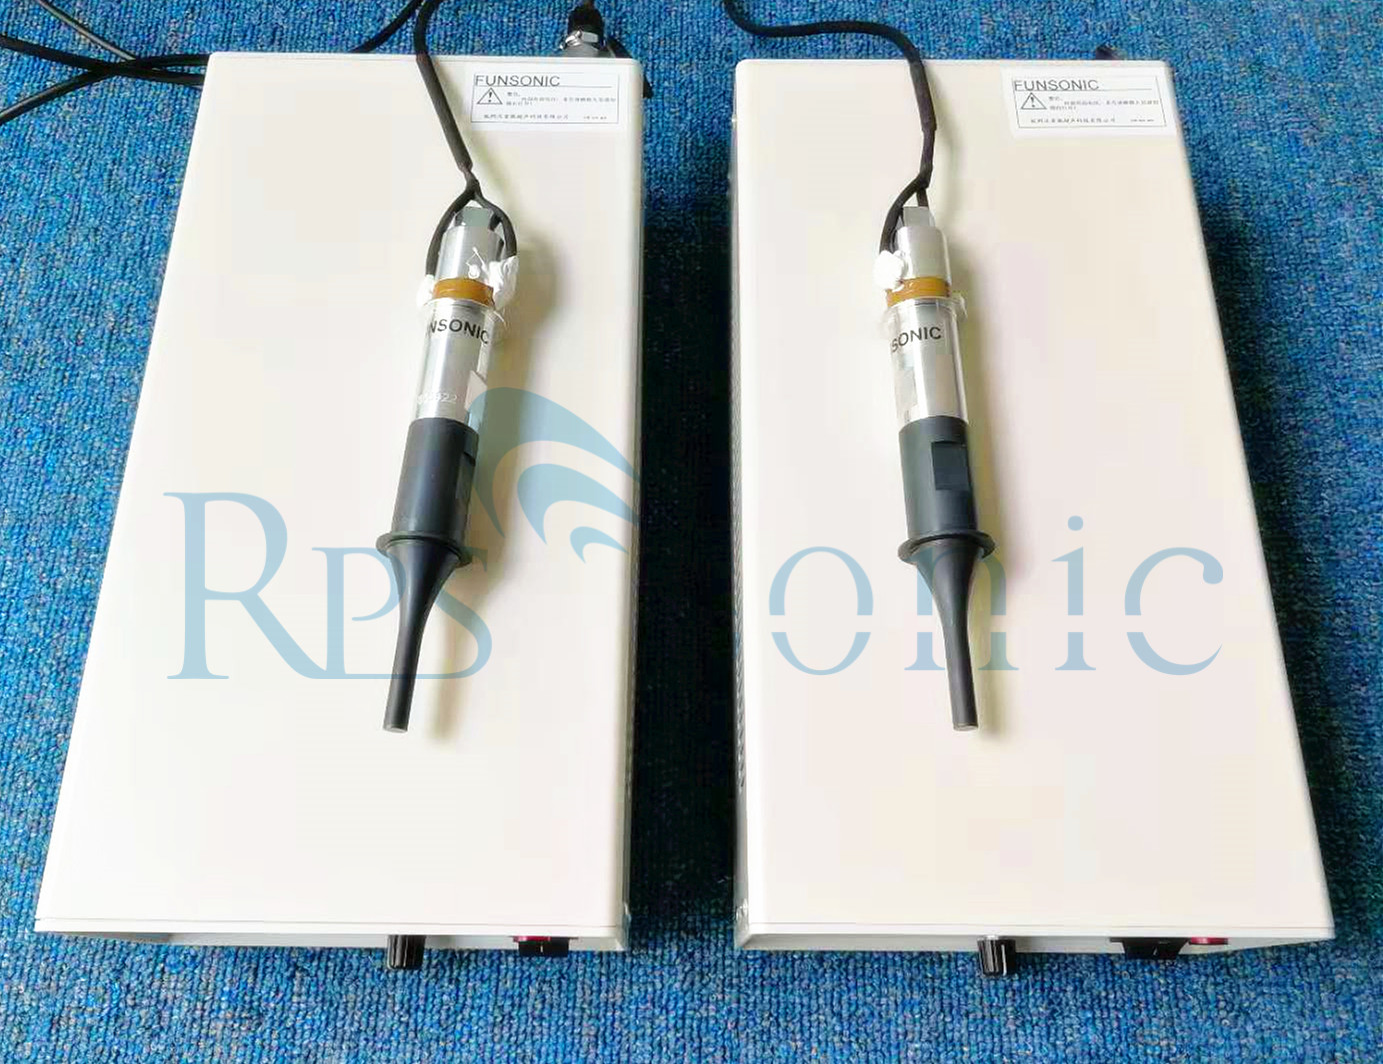 How to choose right ultrasonic transducer